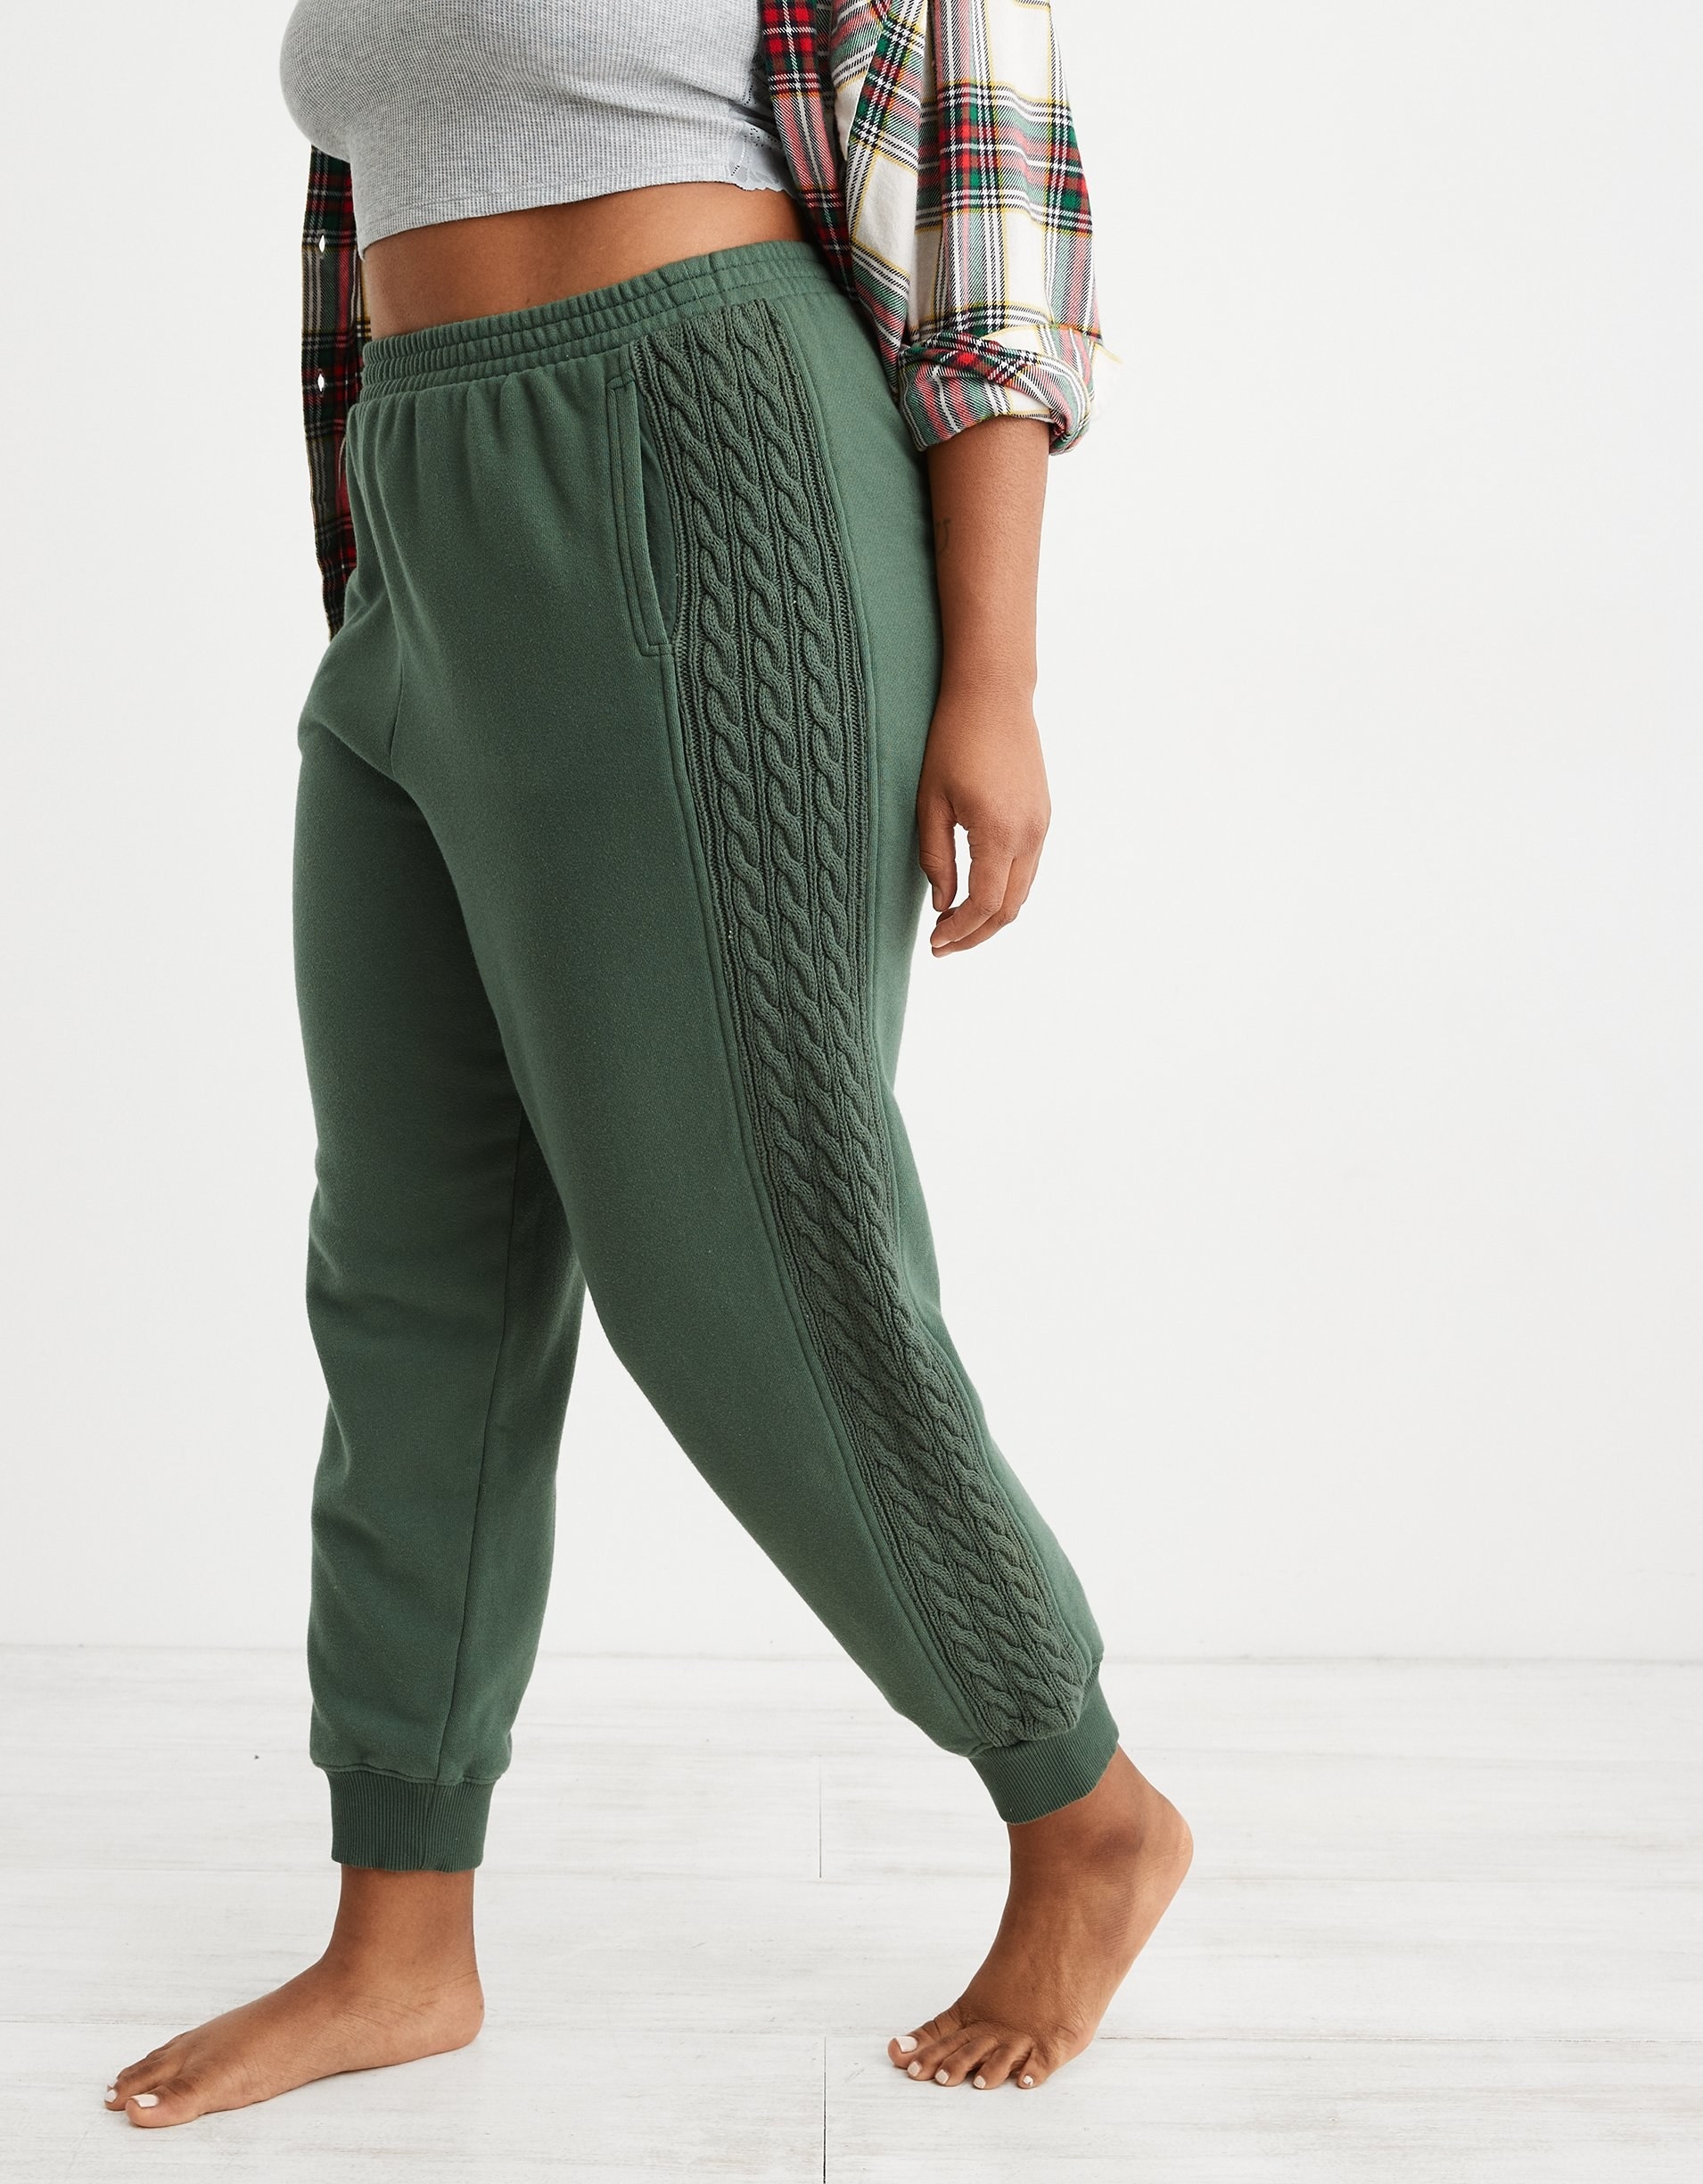 model in green joggers with knit panels down the sides of both legs